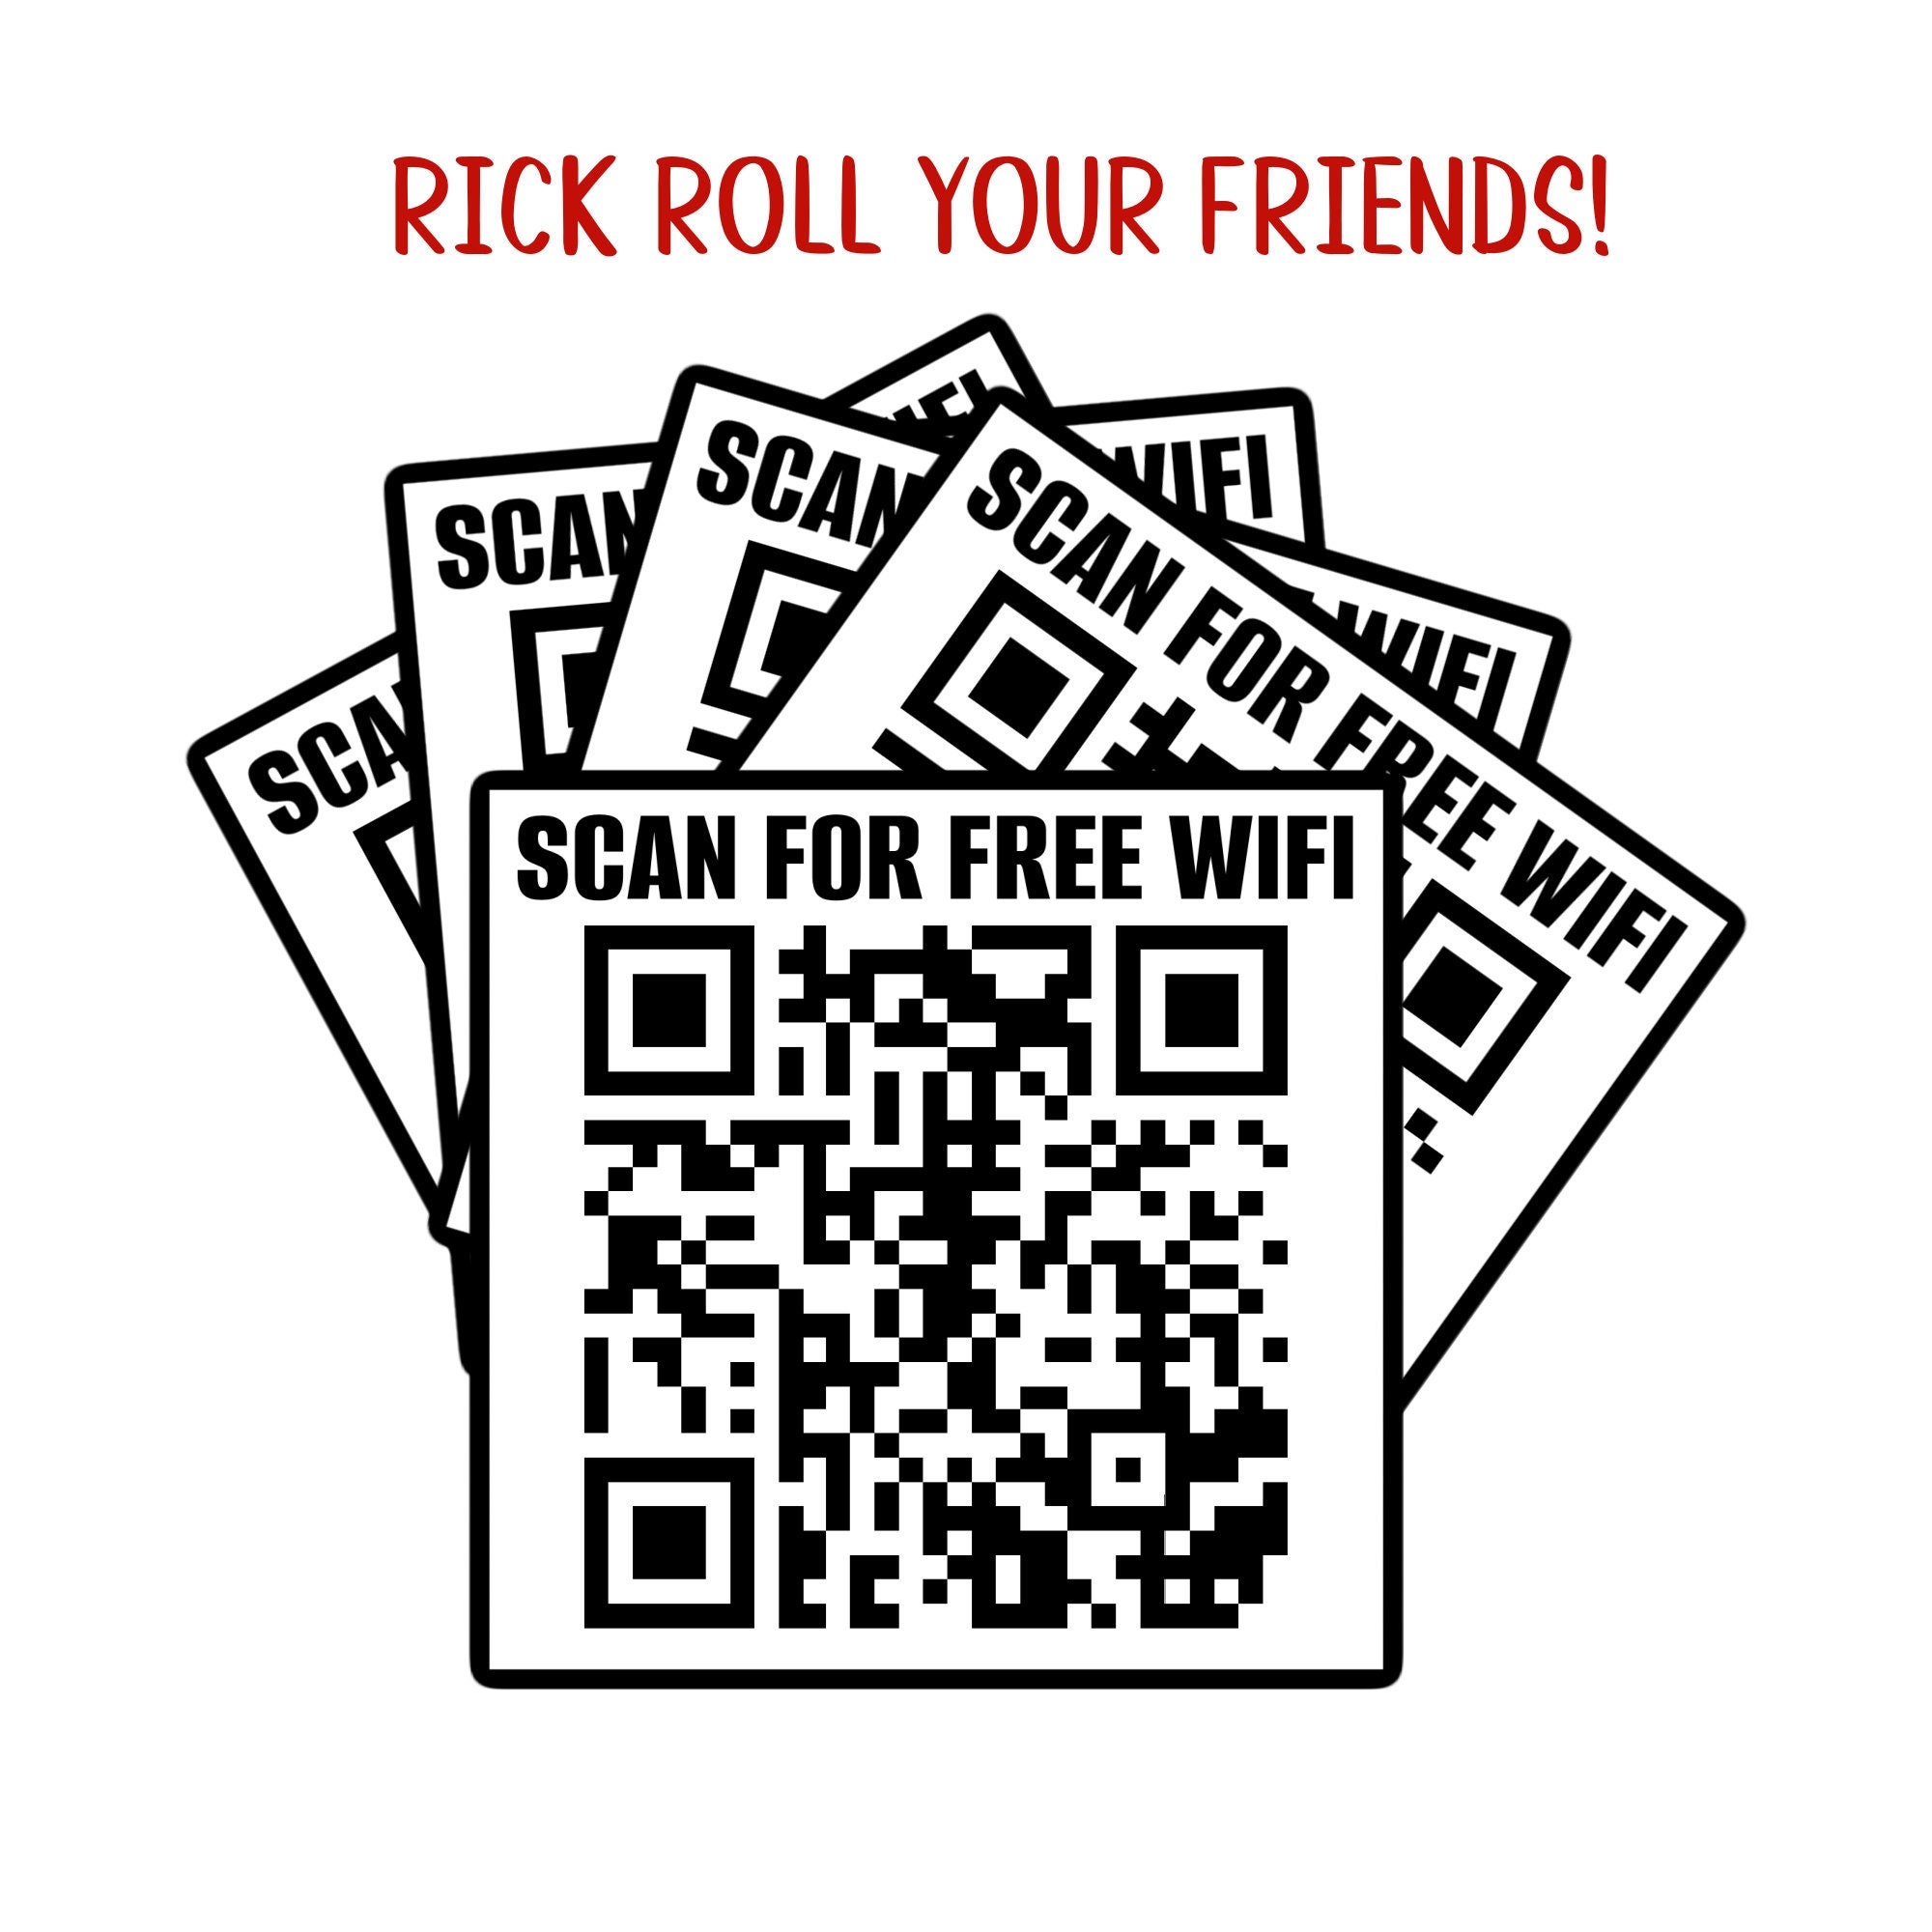  (5 Pack) Rick Roll QR Code Sticker - Never Going to Give You  Up - Never Gonna Give You Up - 3.5 x 3.5 inch - Funny Prank Joke Gag